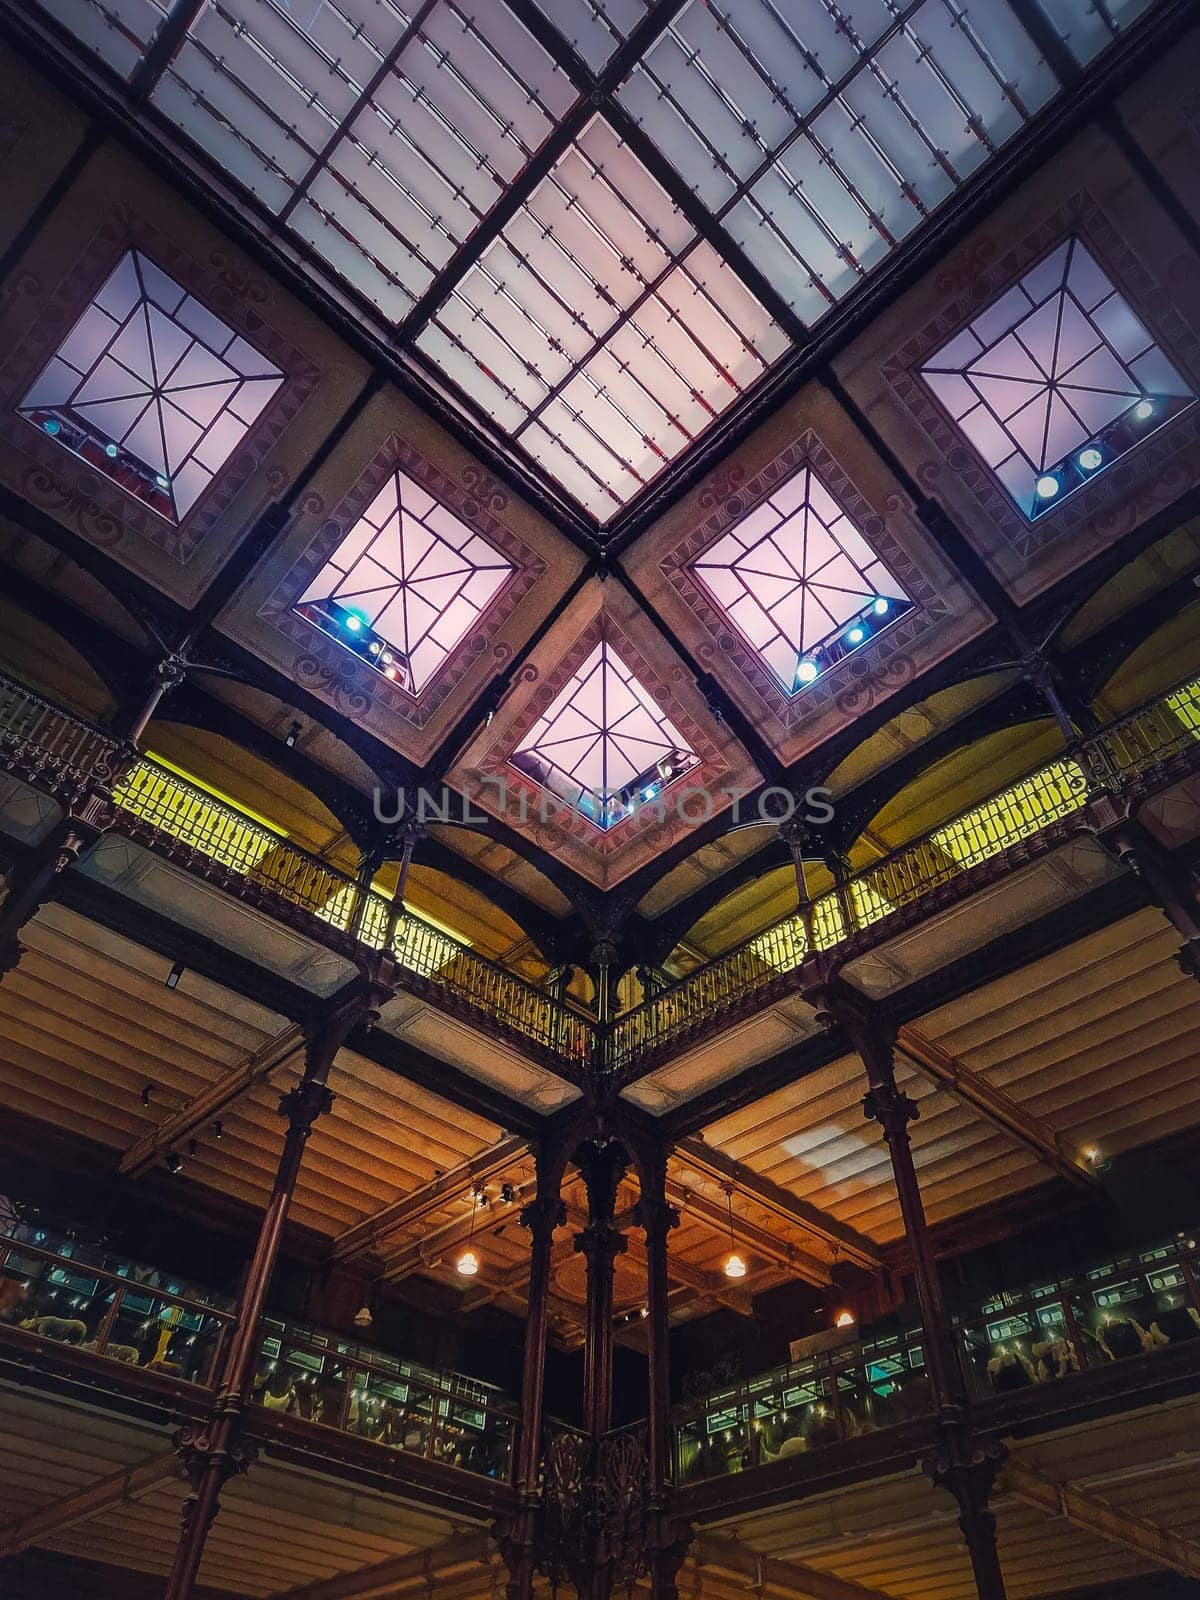 Architectural details of the glowing glass ceiling inside the Museum of Natural History, Paris, France by psychoshadow